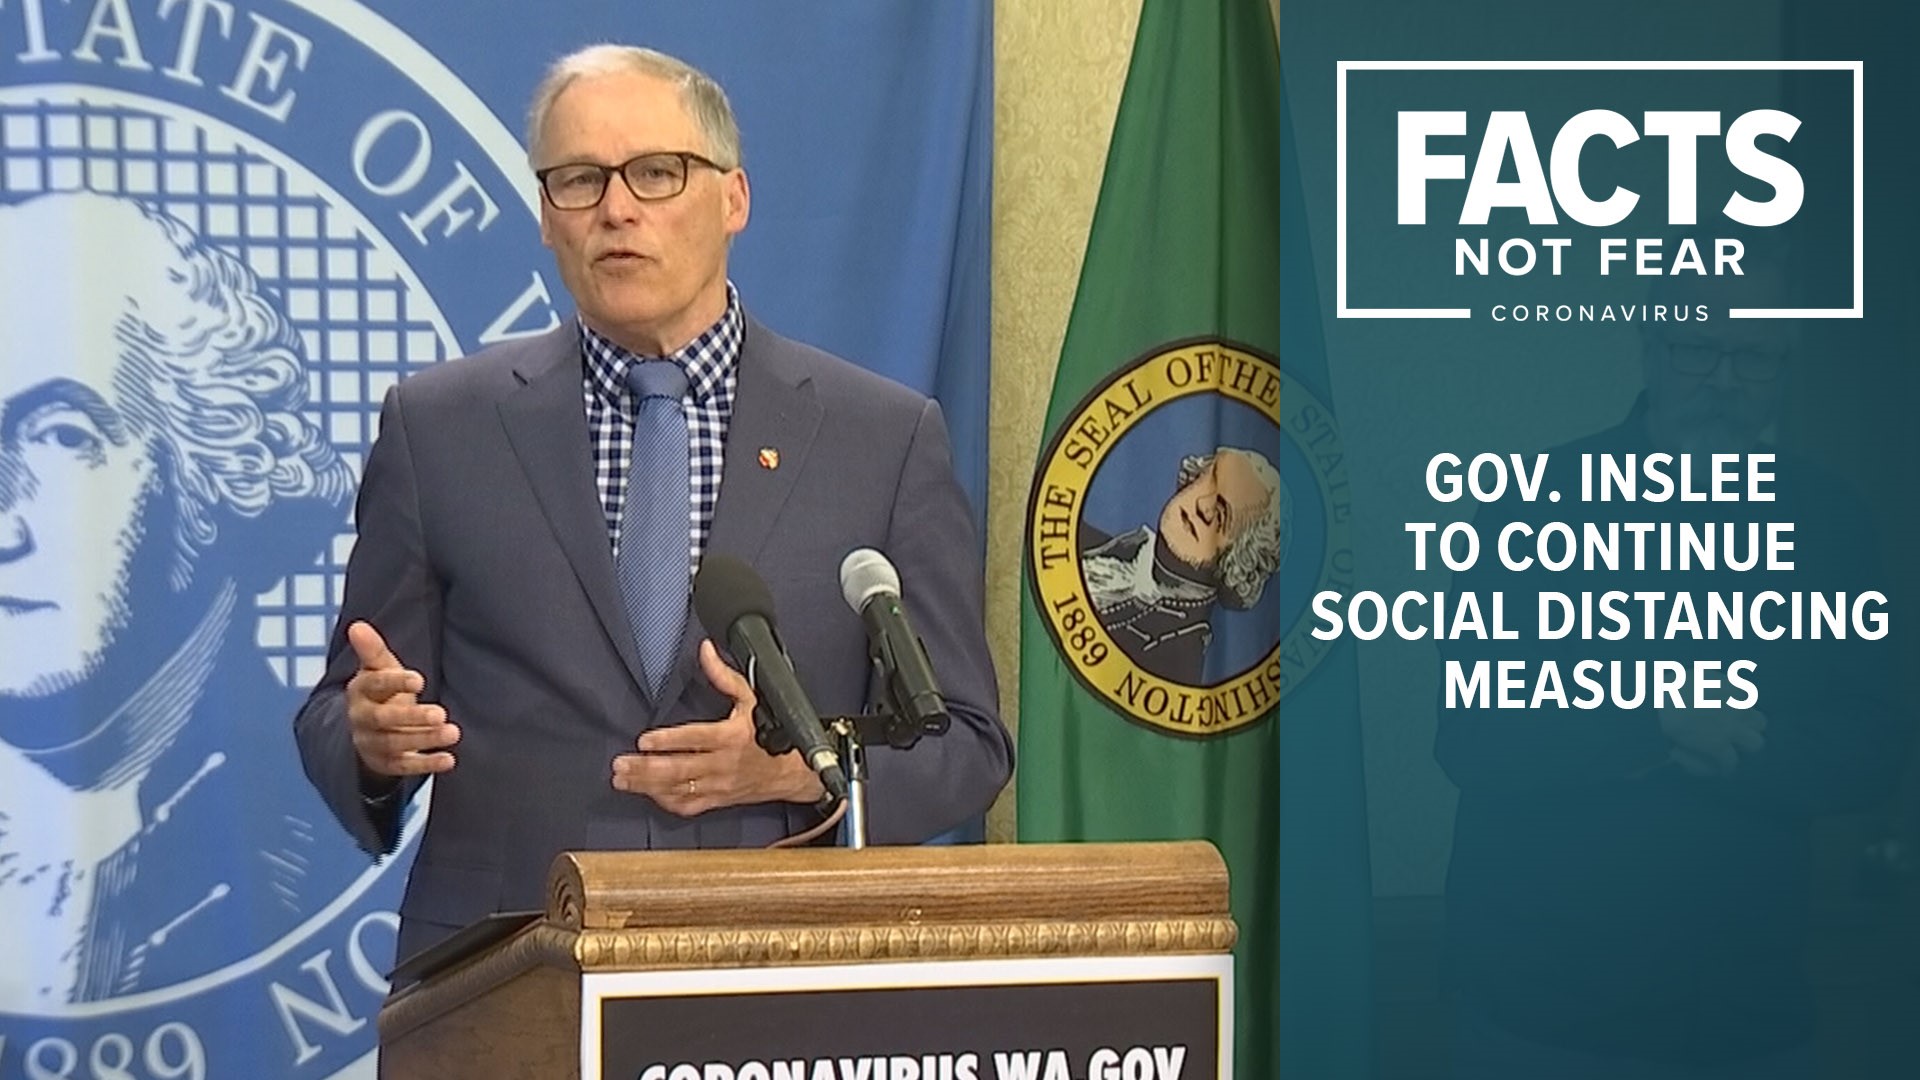 Washington has seen success with social distancing to curb coronavirus, but governor Inslee says it's not time to lift them.